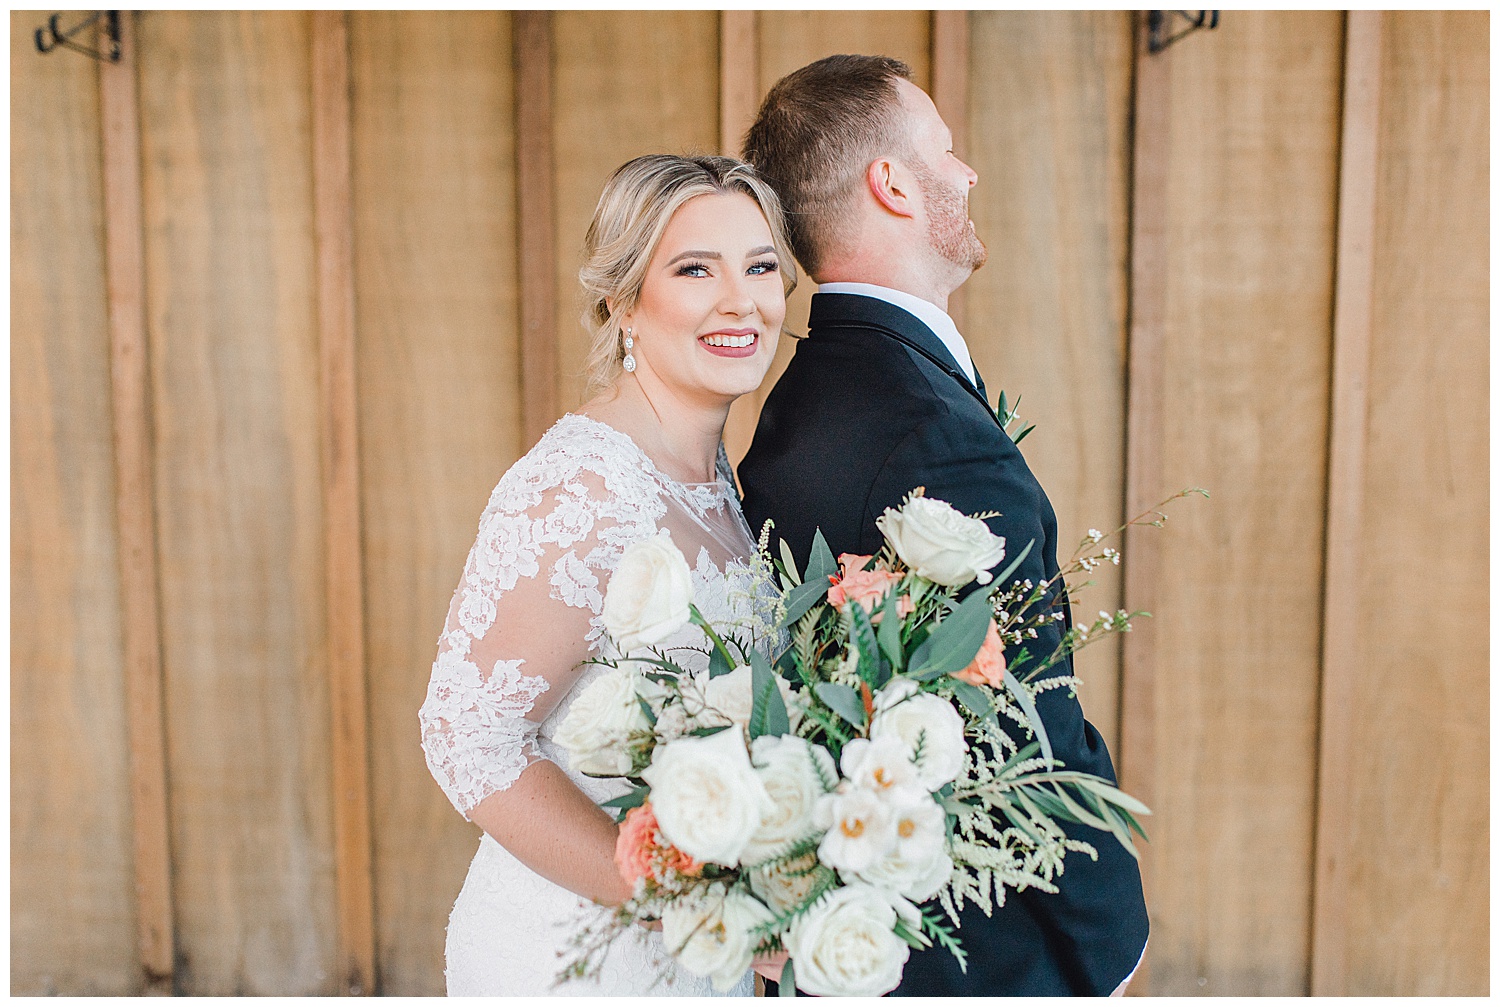 ERC-7059_A beautiful winter wedding in Snohomish, Washington at Thomas Family Farm was simply perfect.  This rustic and modern styled wedding was dripping with romance and photographed by Emma Rose Company, a pacific northwest wedding photographer..jpg